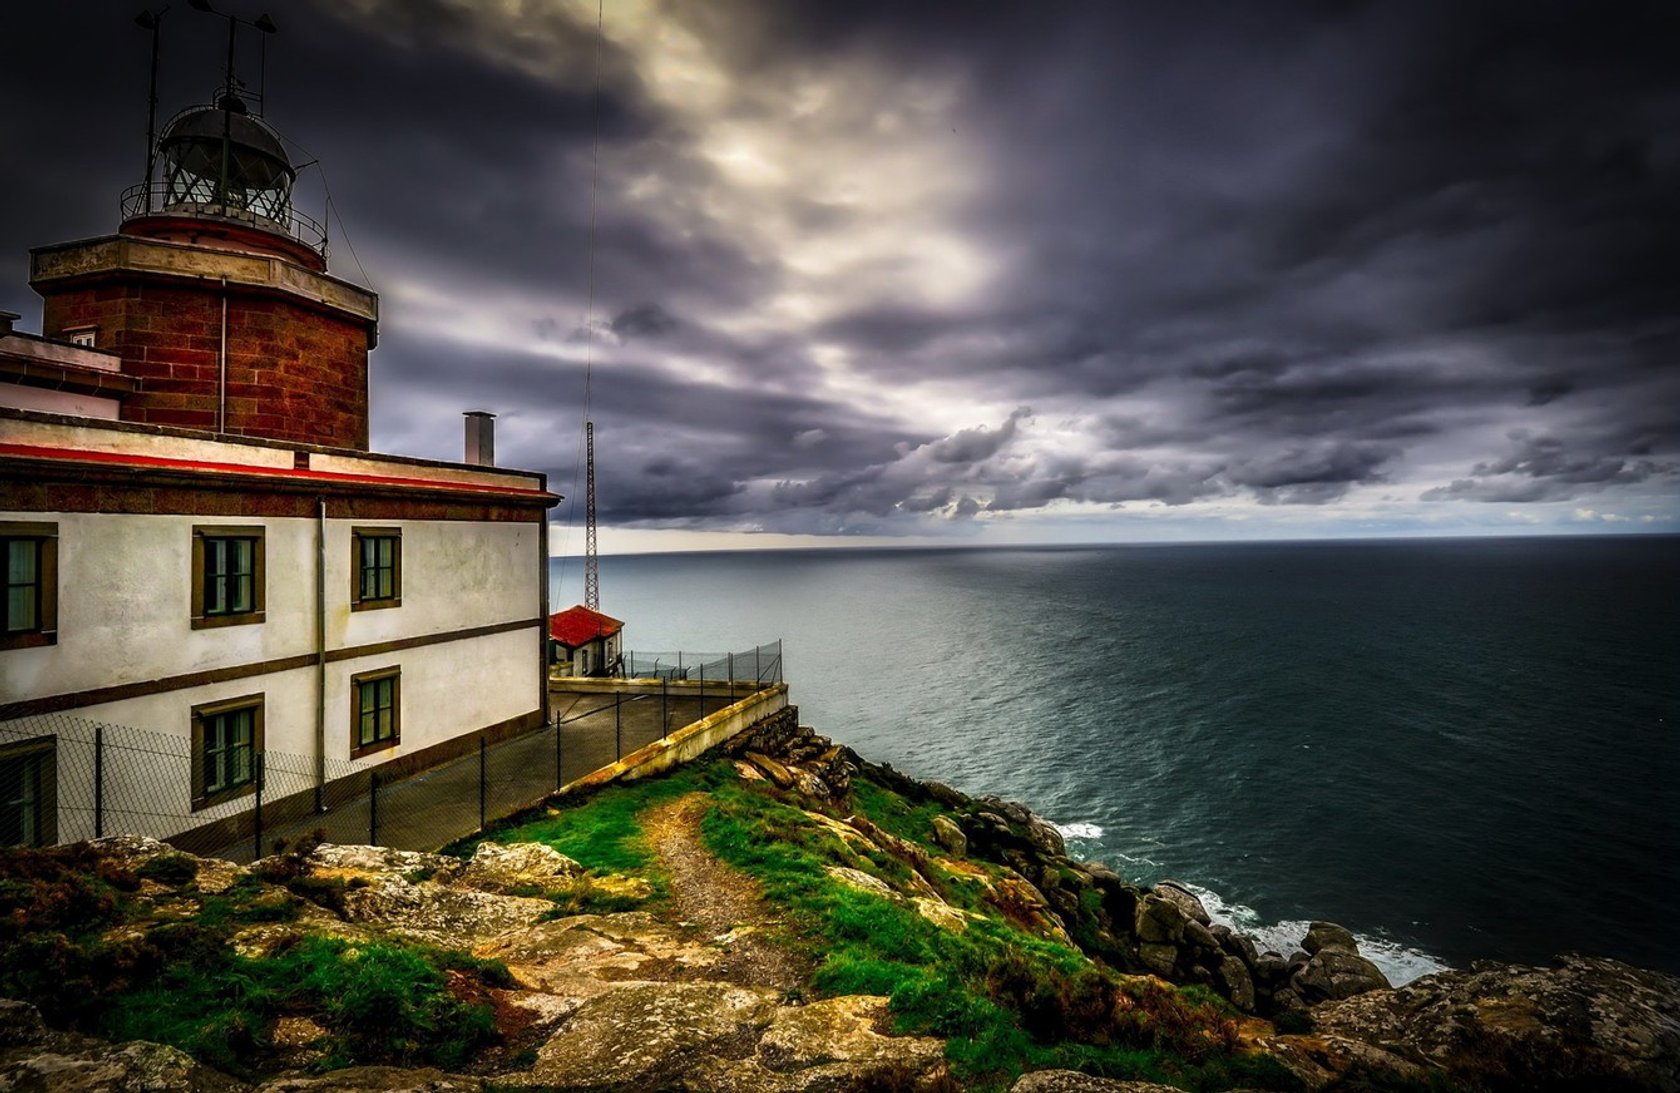 Finisterre Cape Image & Photo (Free Trial)